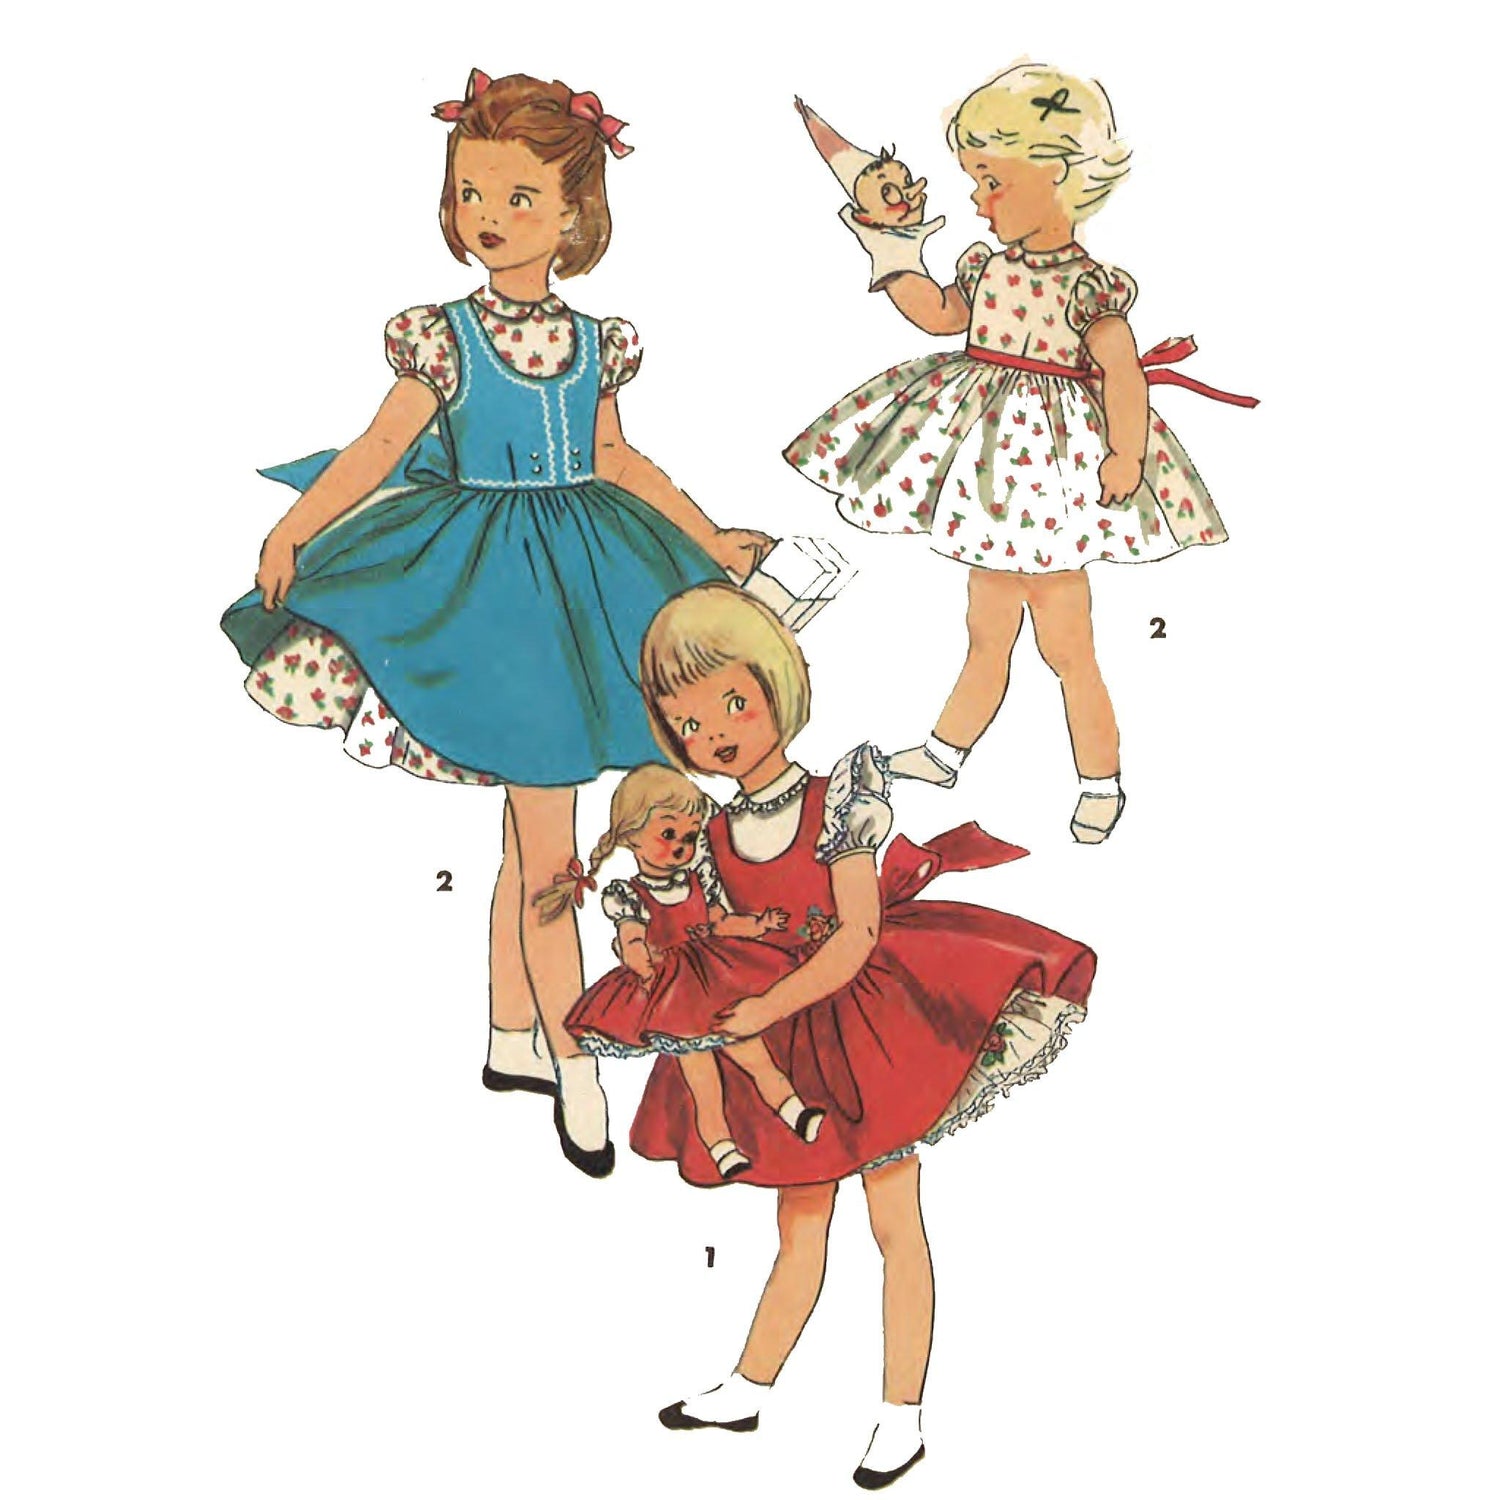 3 little girls in party dress with doll in matching dress